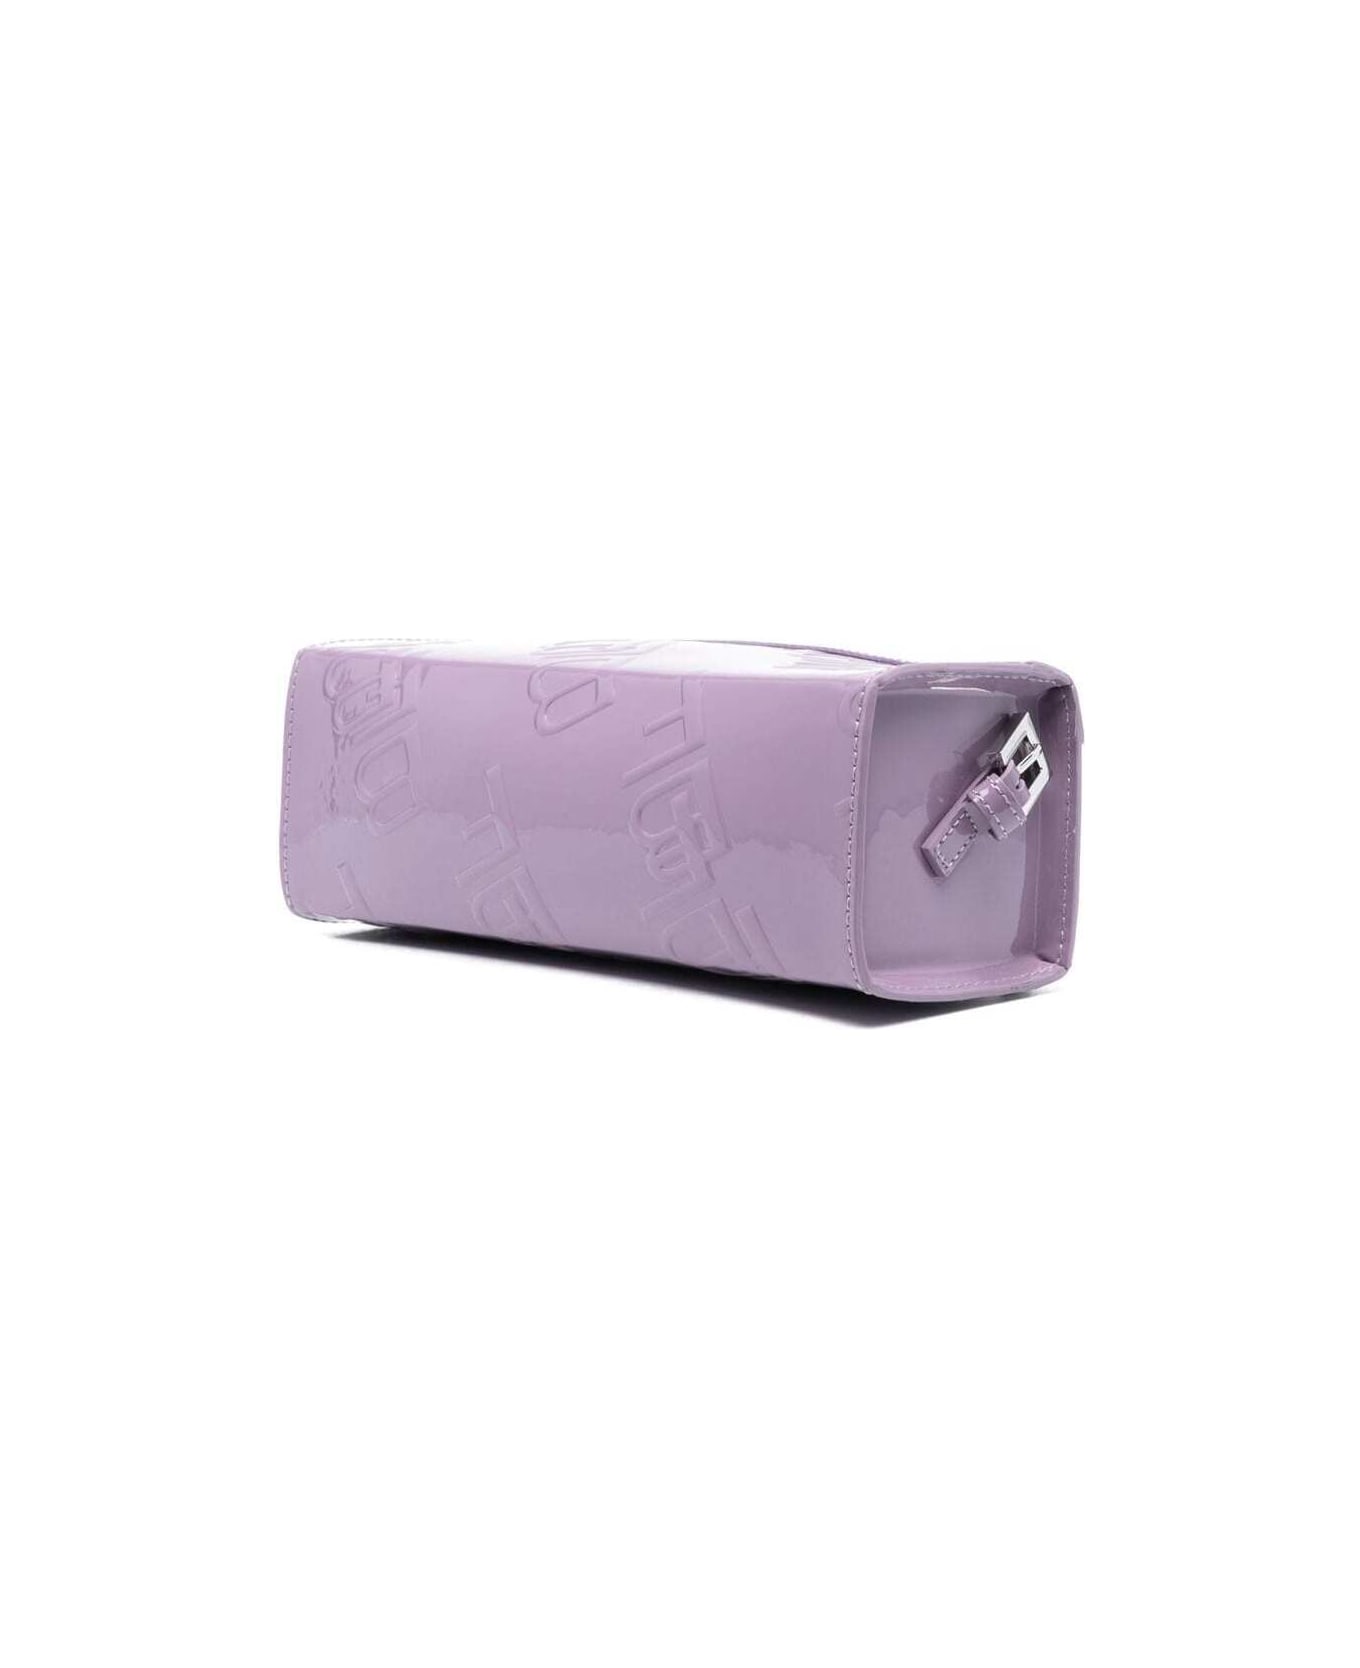 BY FAR Karo Lilac Patent Shoulder Bag With Embossed Logo All-over In Leather Woman - Violet クラッチバッグ